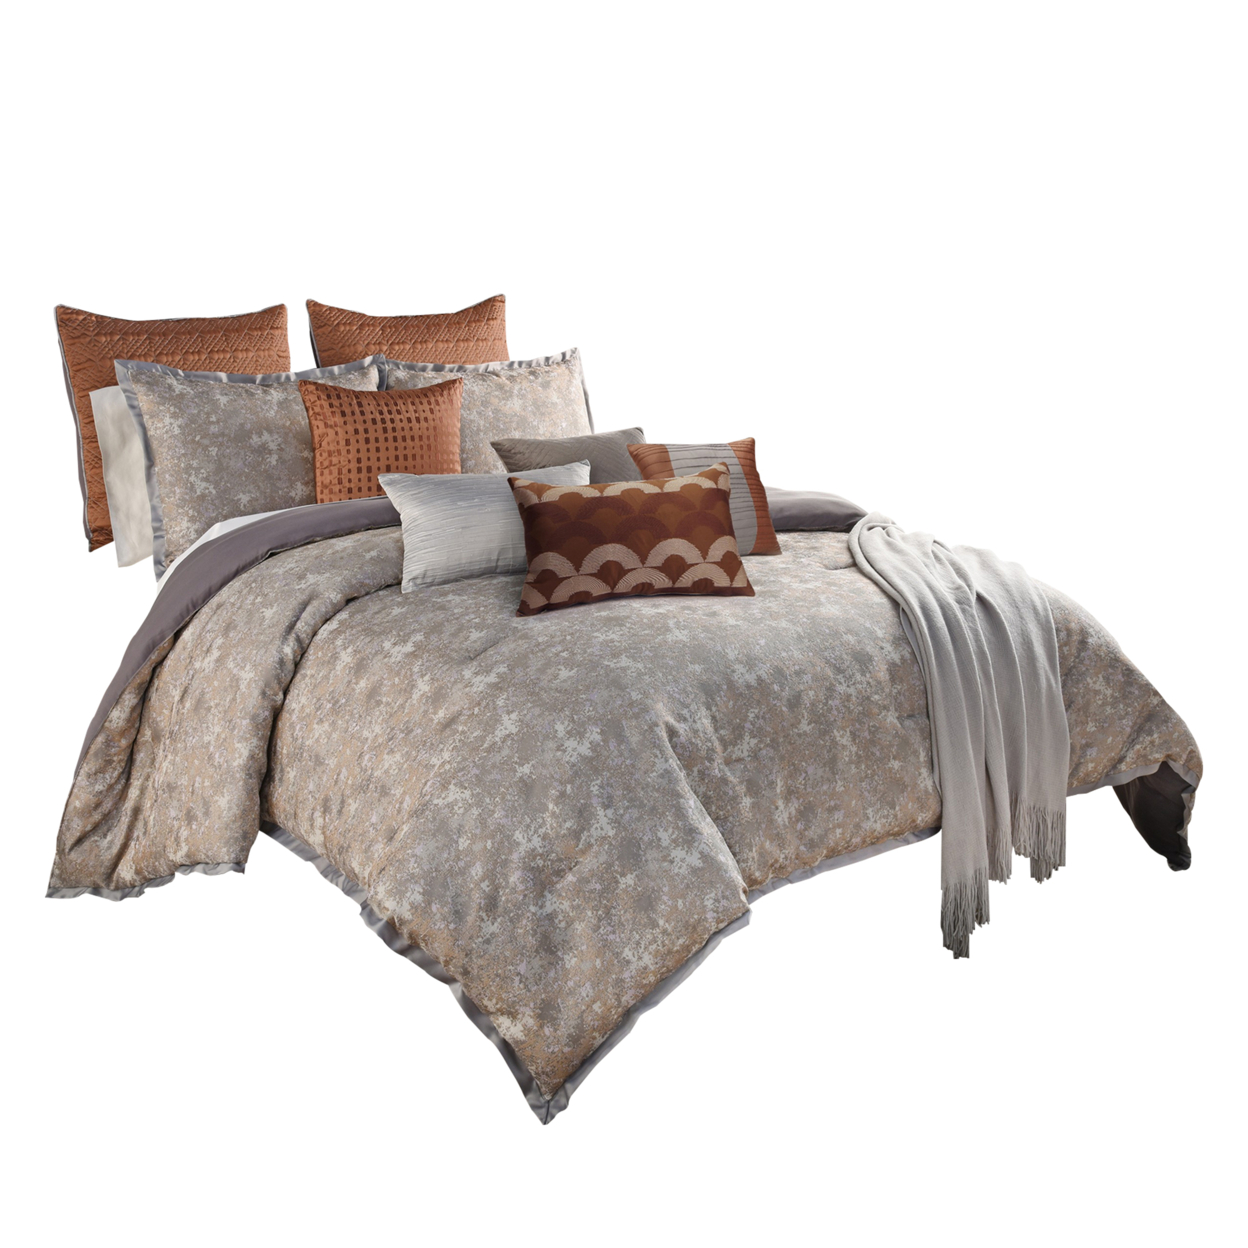 12 Piece King Polyester Comforter Set With Textured Details, Gray And Brown- Saltoro Sherpi